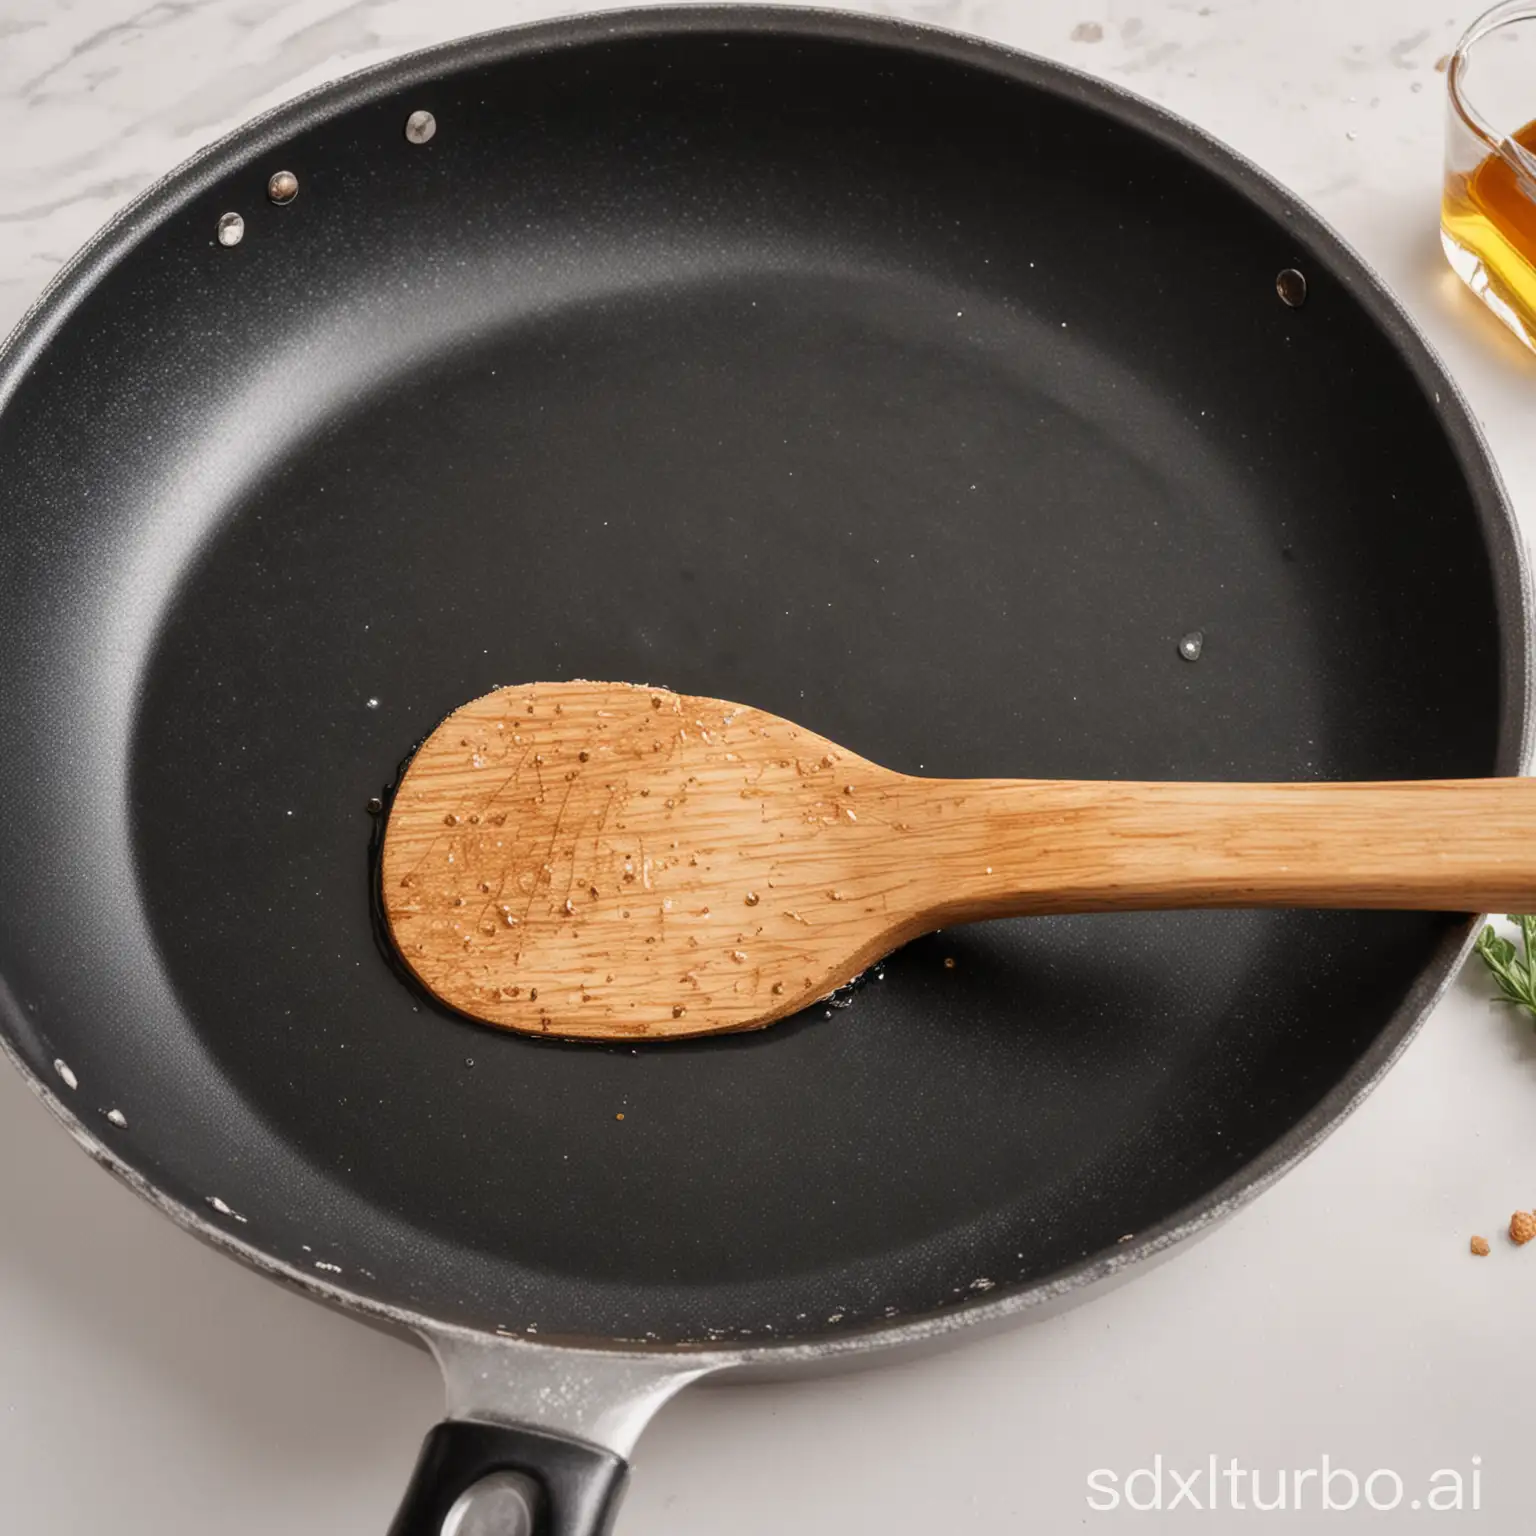 NonStick-Frying-Pan-with-Shimmering-Oil-and-Spatula-on-White-Background